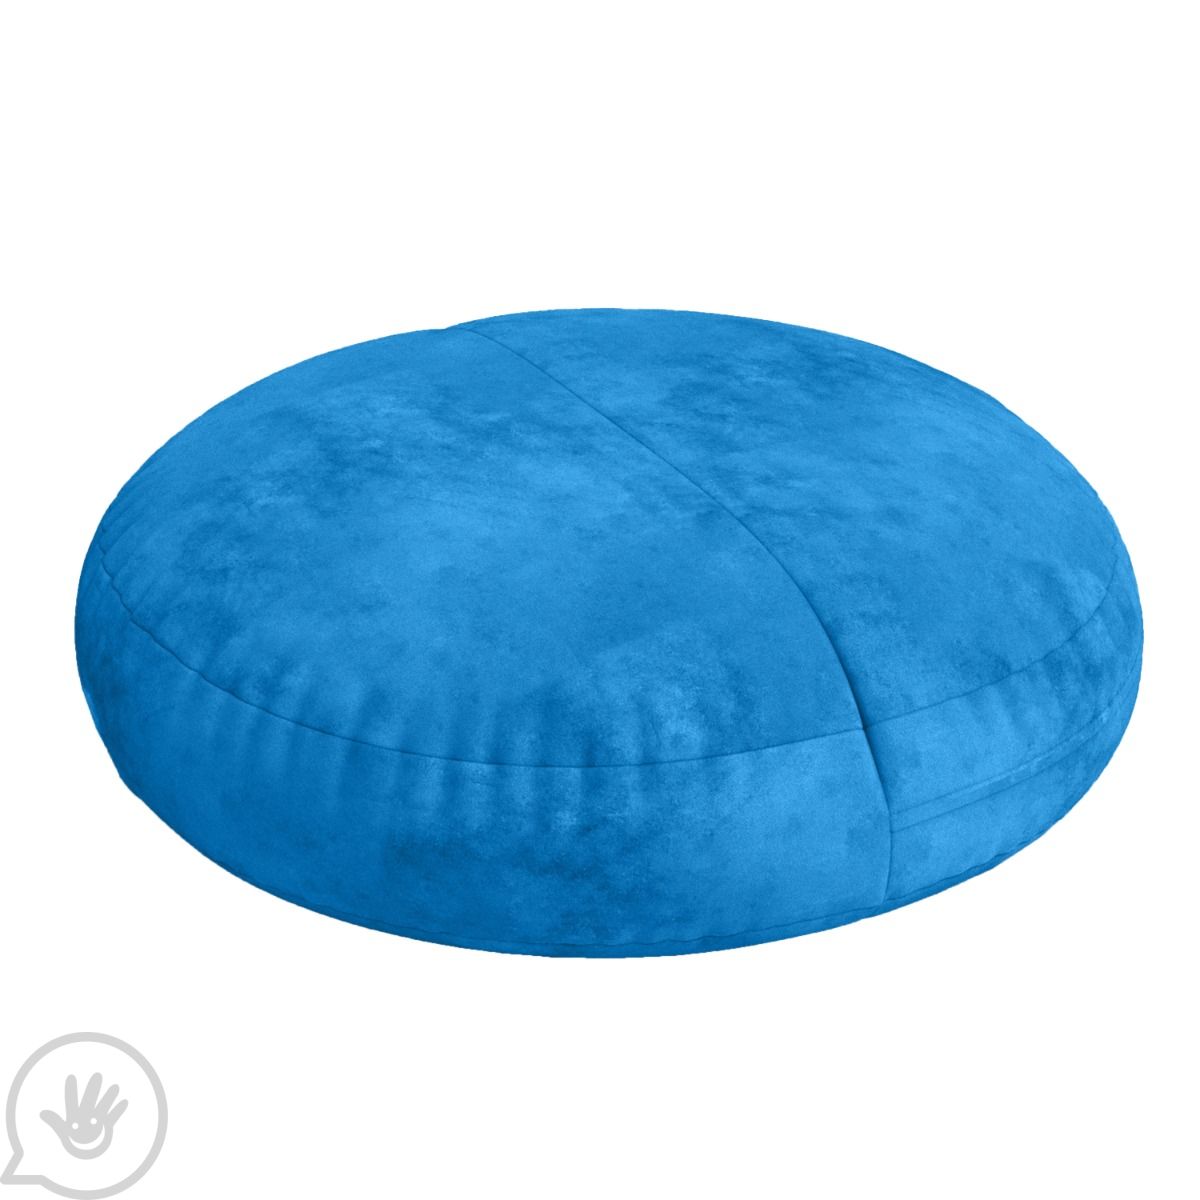  Jaxx 6 Foot Cocoon - Large Bean Bag Chair for Adults